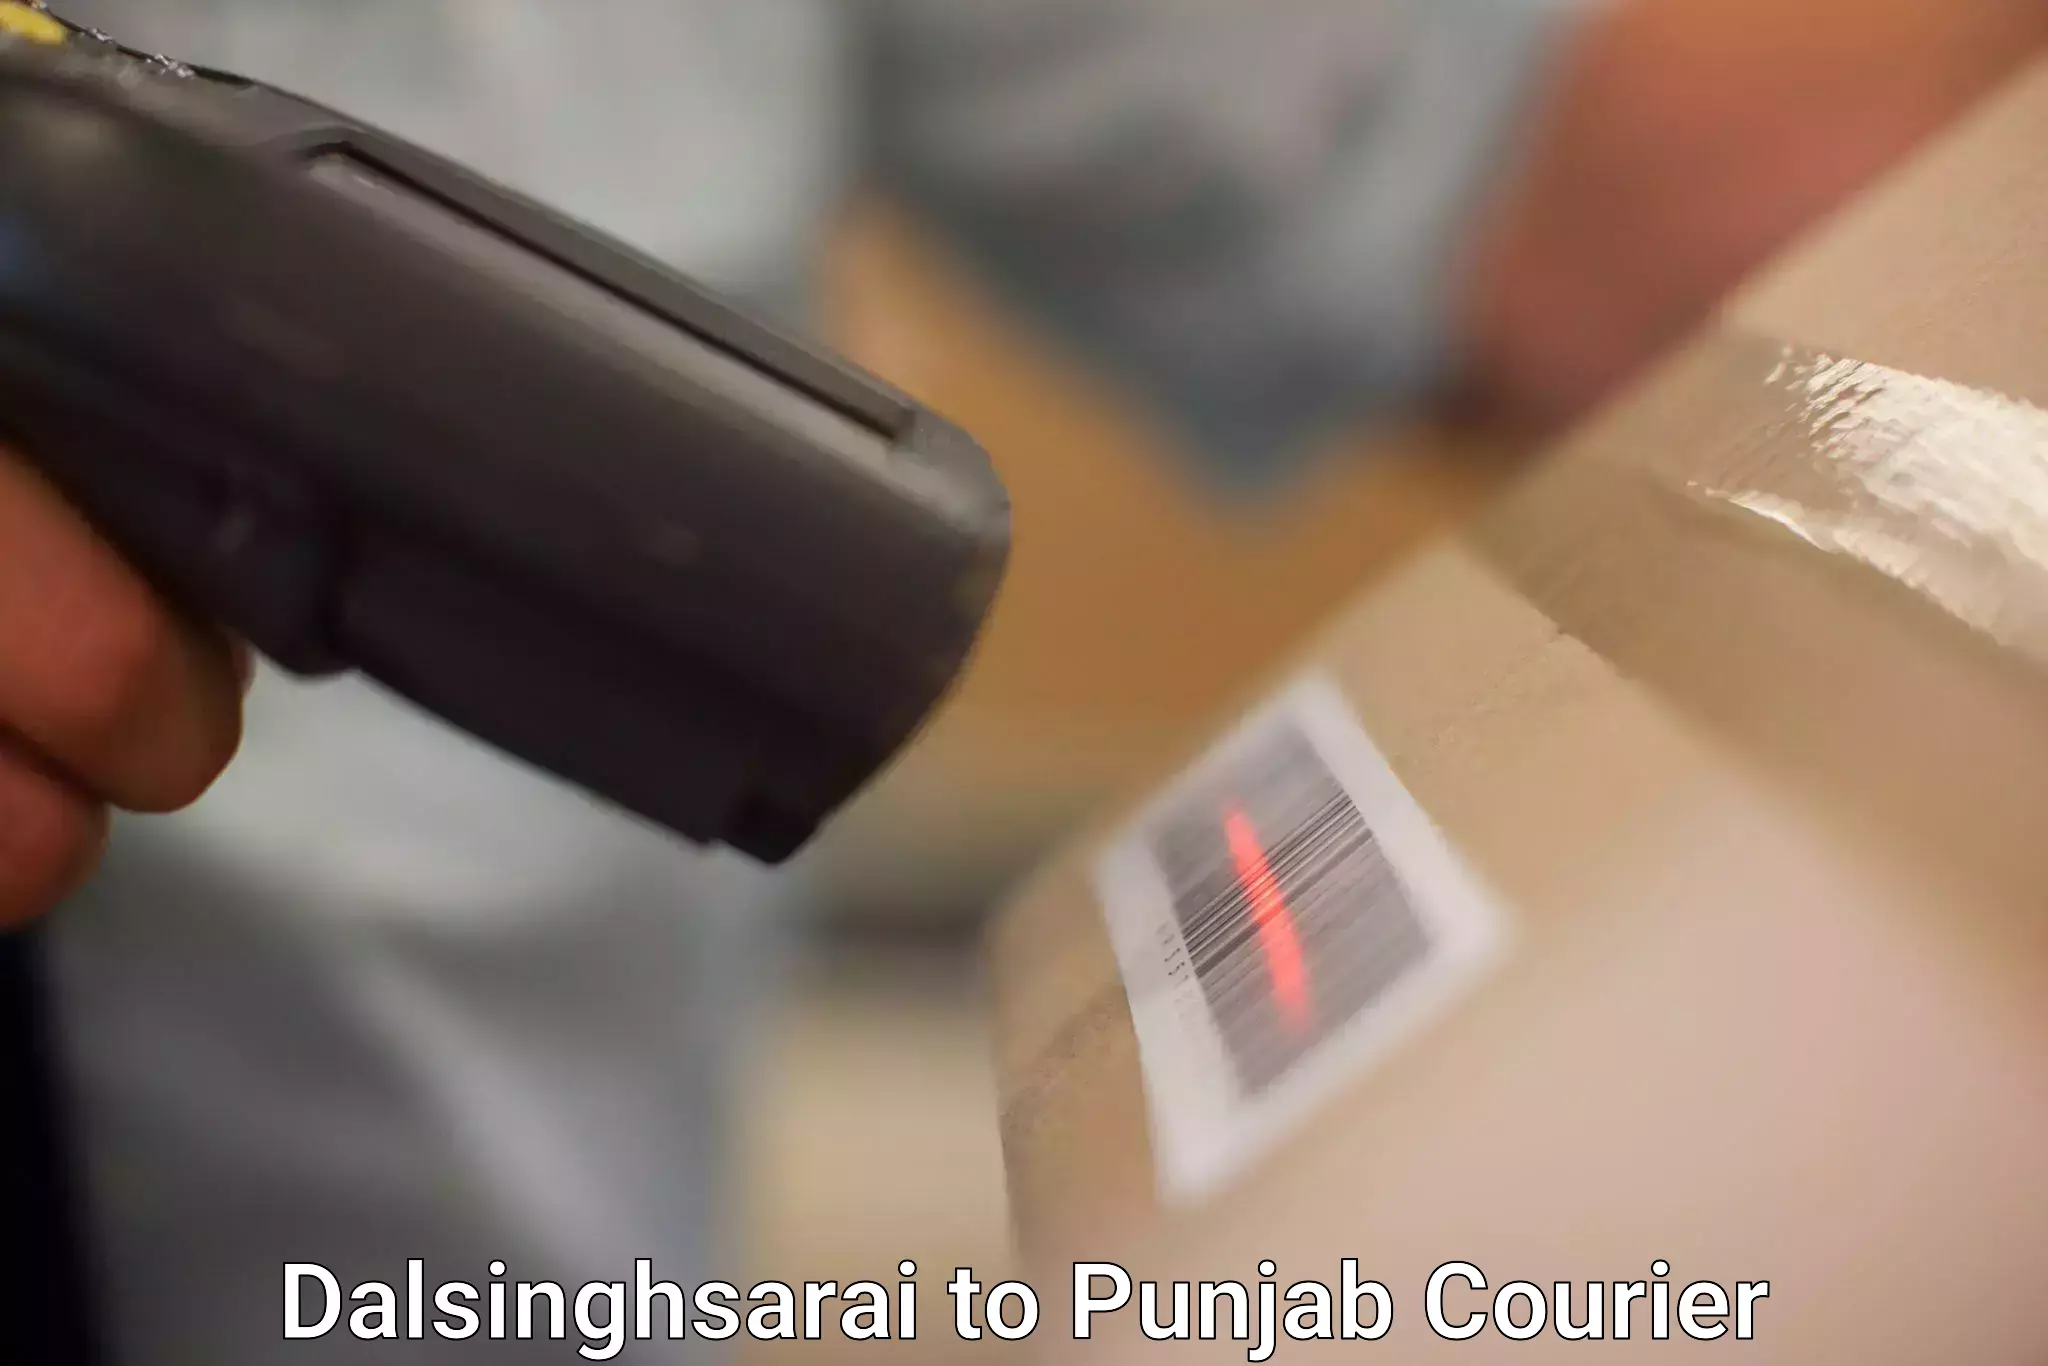 Secure packaging Dalsinghsarai to Sultanpur Lodhi